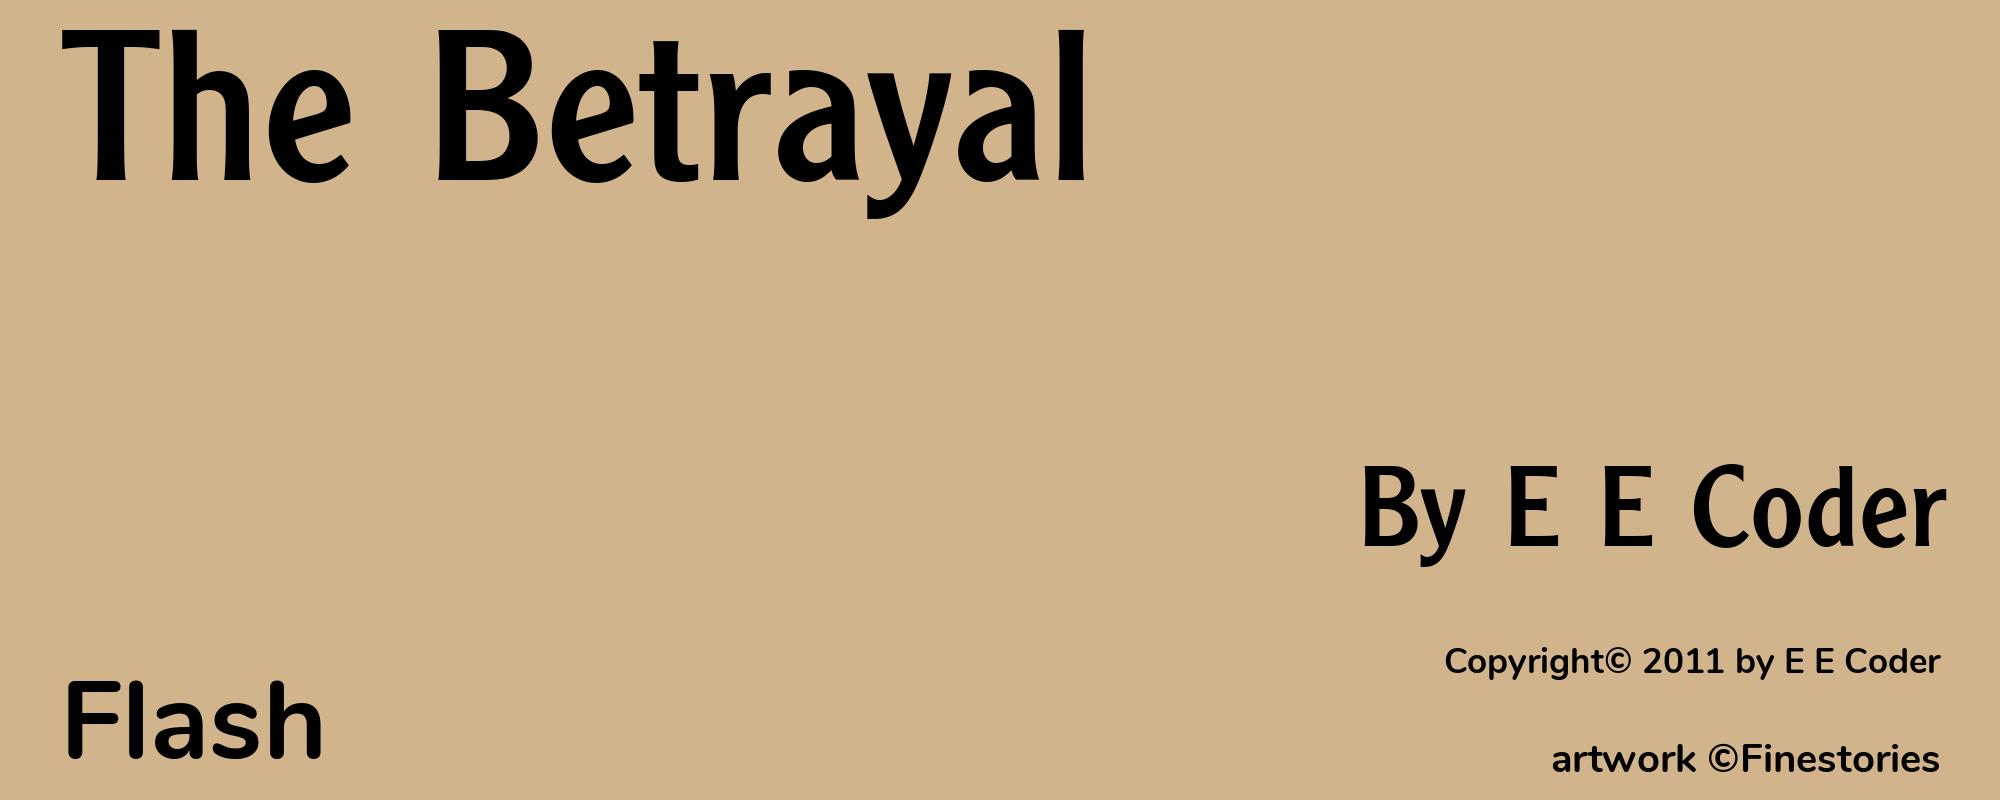 The Betrayal - Cover